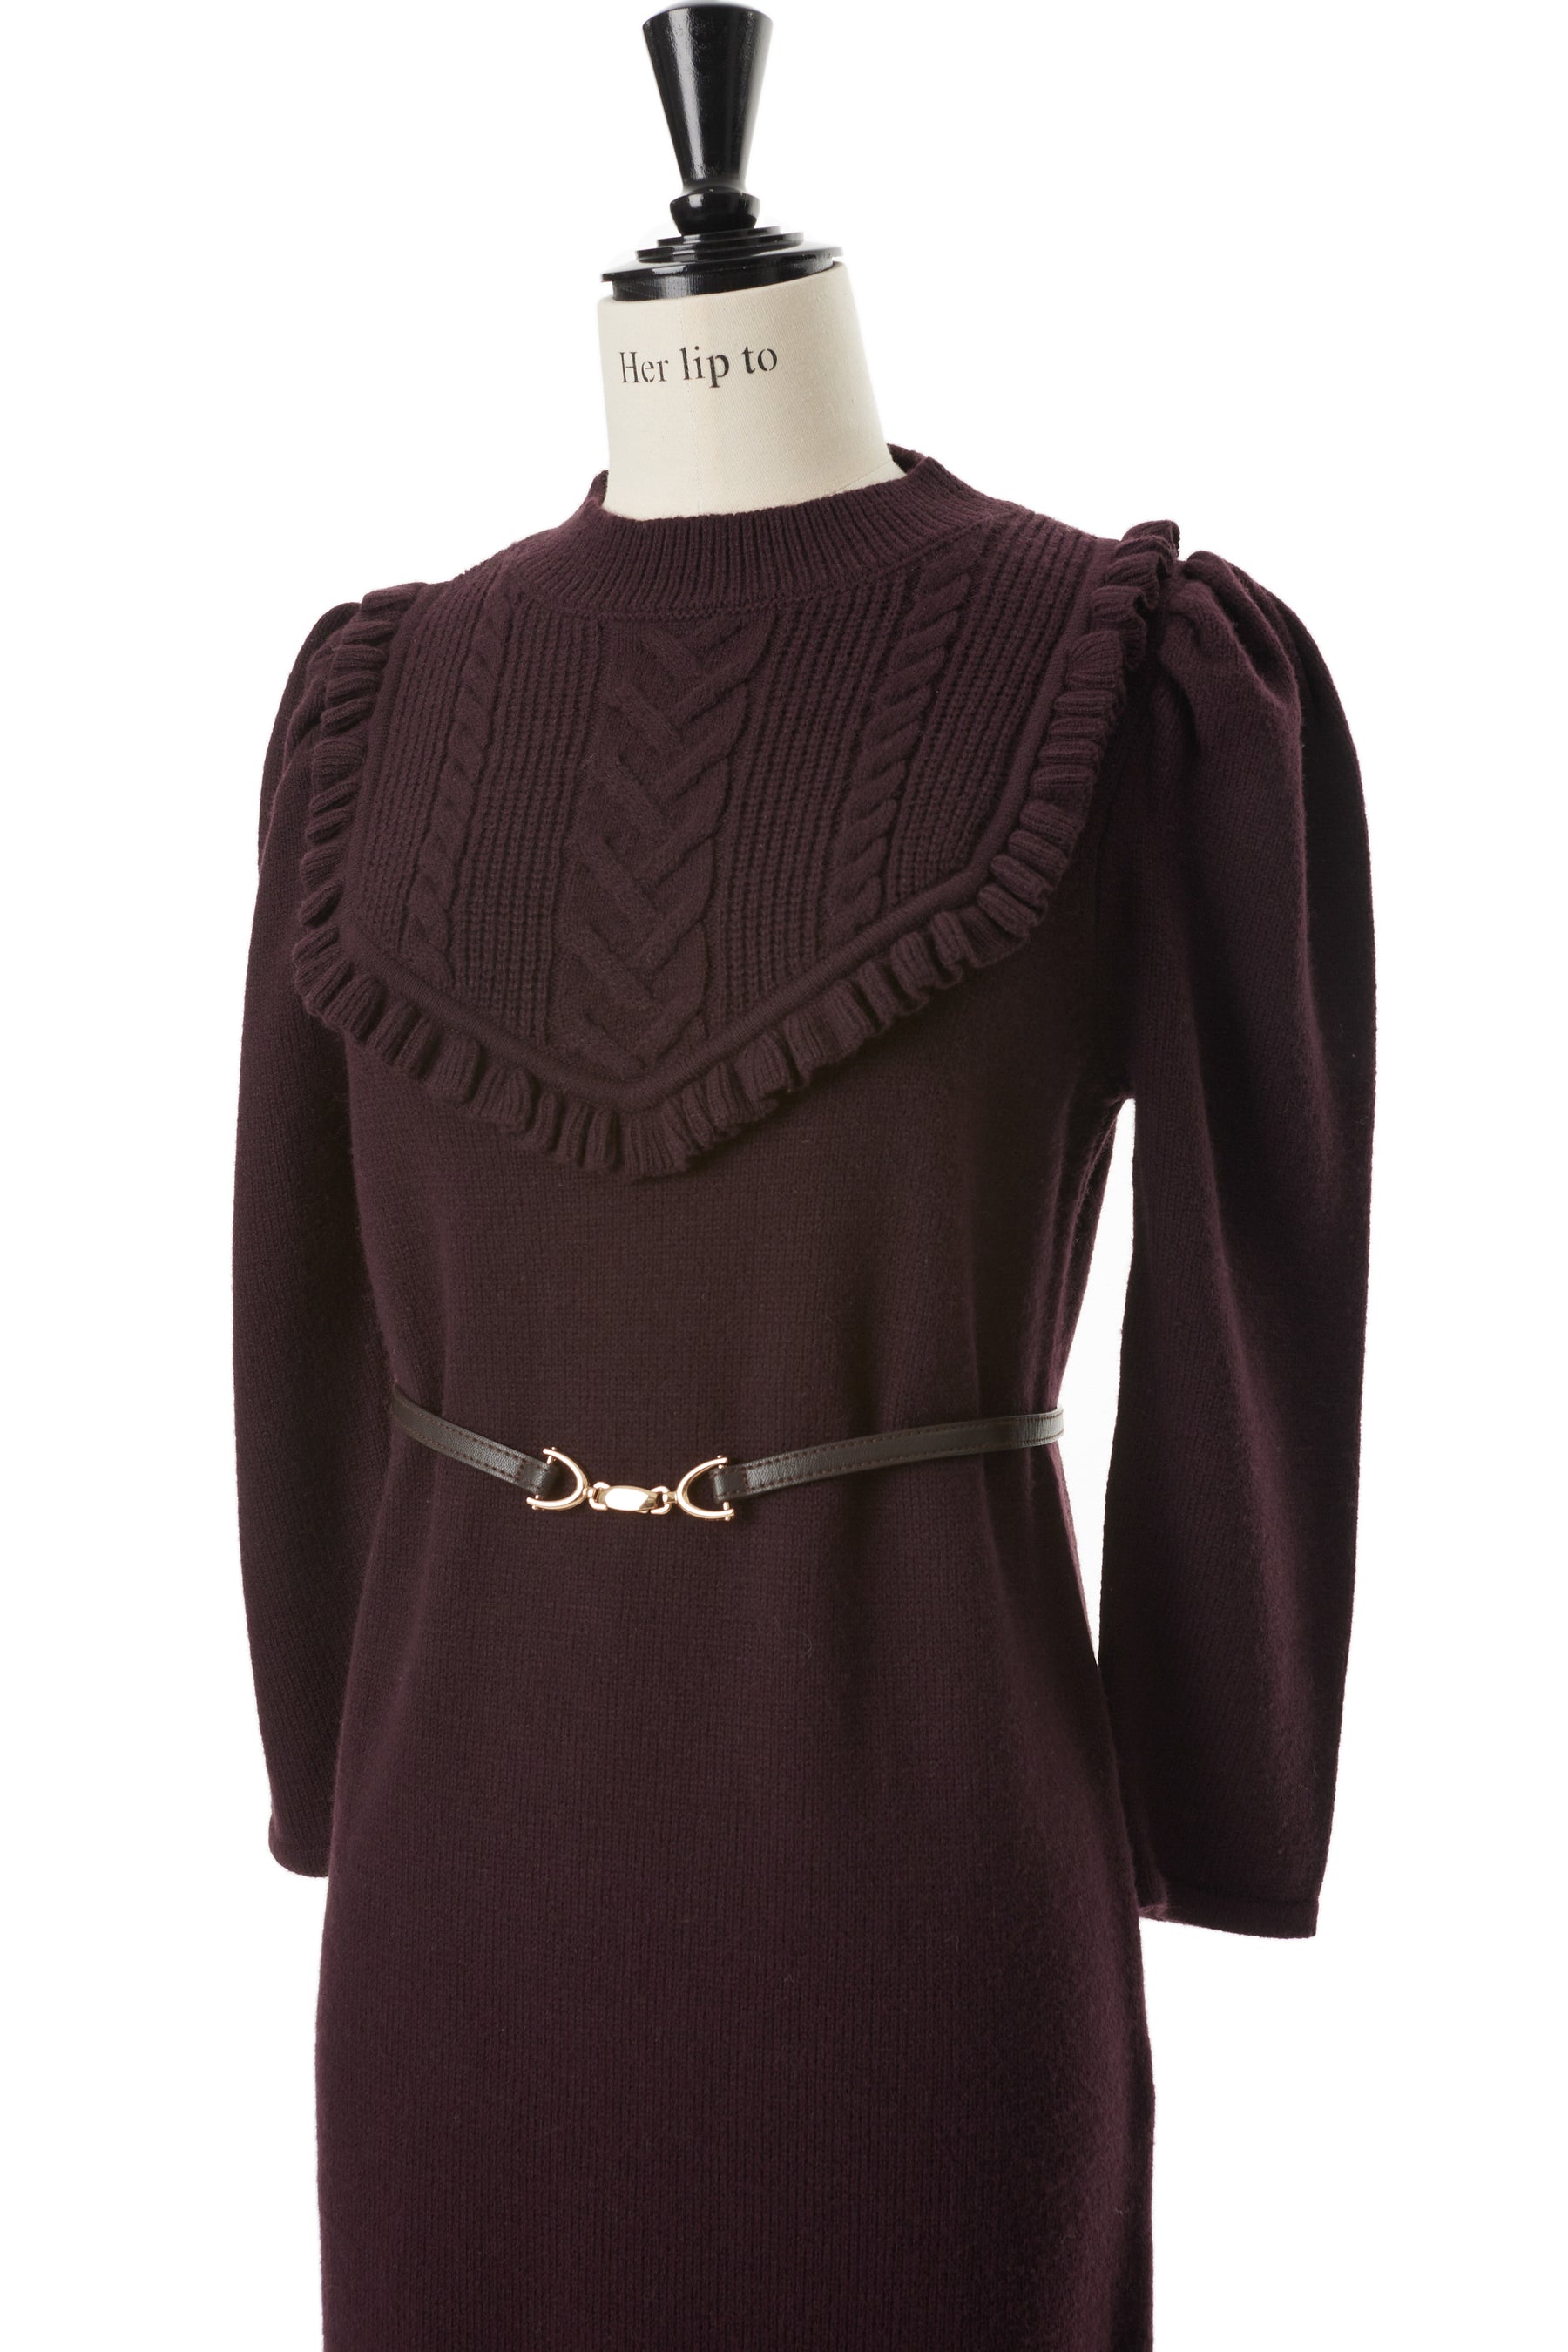 her lip to Belted RuffleCable-Knit Dress | labiela.com